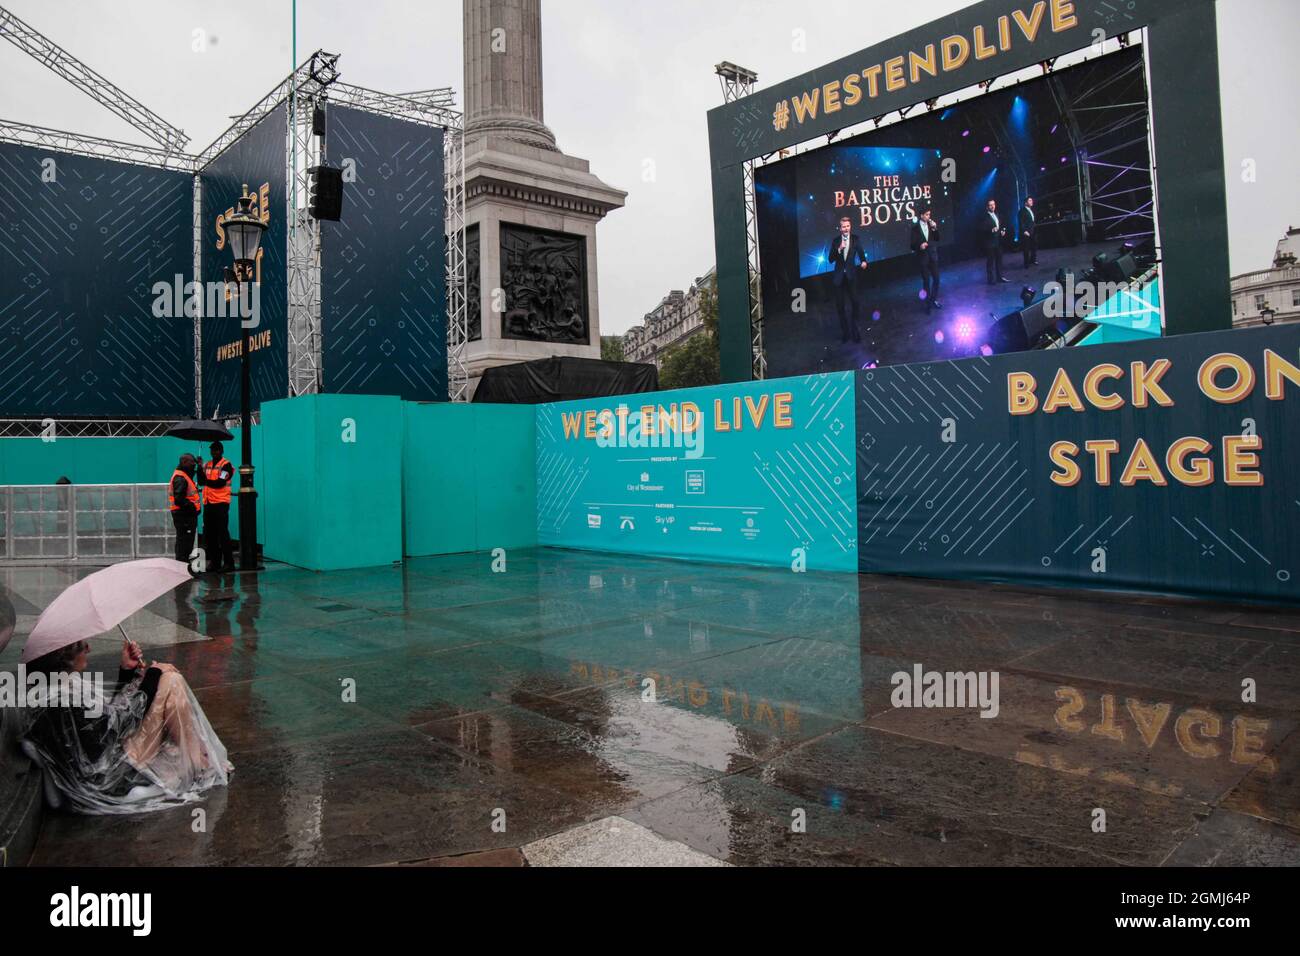 London UK Sunday 19 September 2021 Not even the rain could persuade this die hard fan of west en musicals, to move from Trafalgar square were the West Live show was going on this week end . Credit: Paul Quezada-Neiman/Alamy Live News Stock Photo